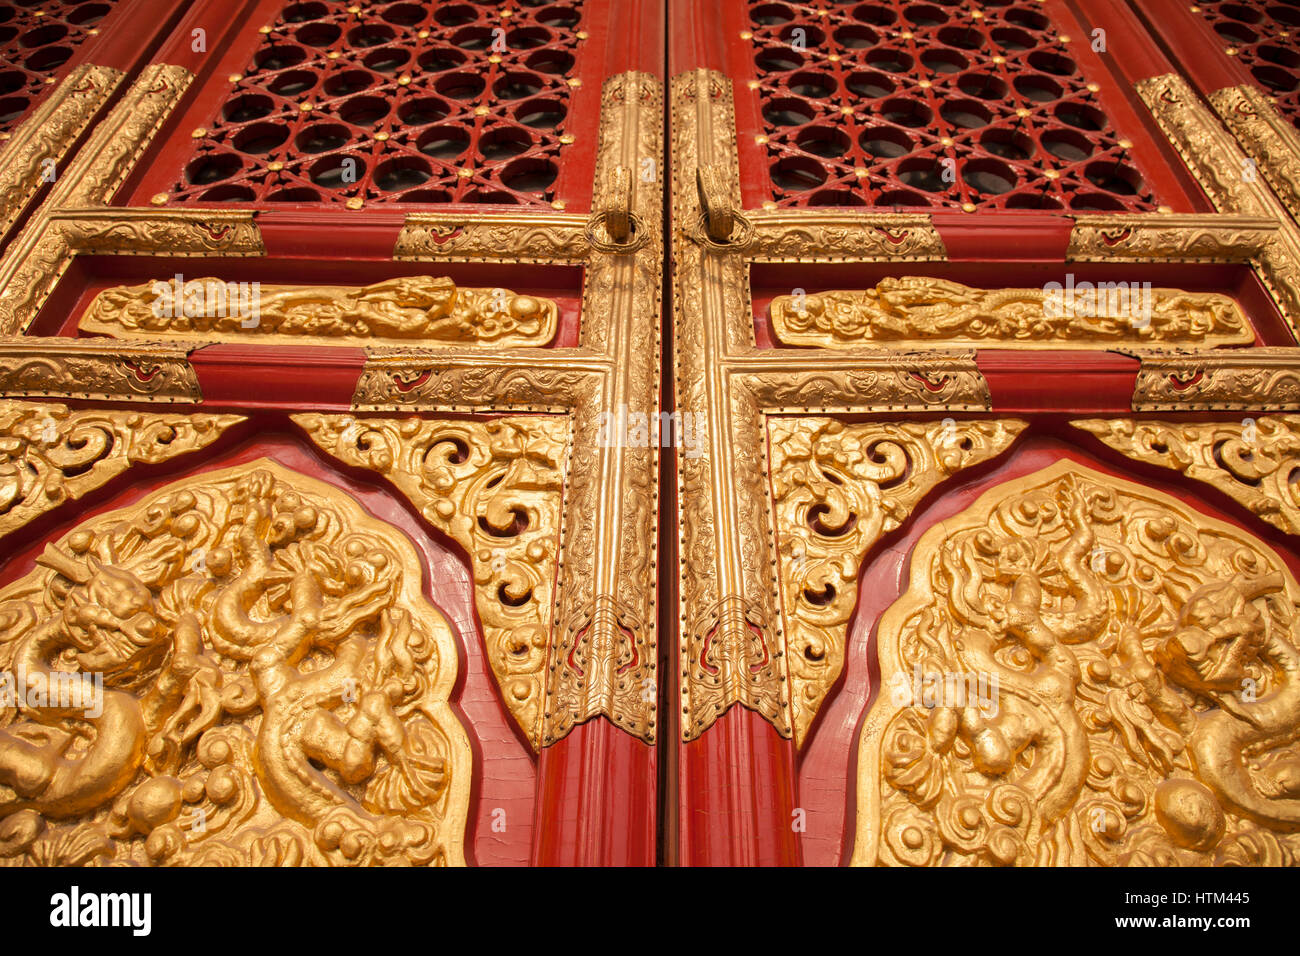 Door knob and the embossed designs of clouds and dragons on the door in the Forbidden City, Beijing, China Stock Photo